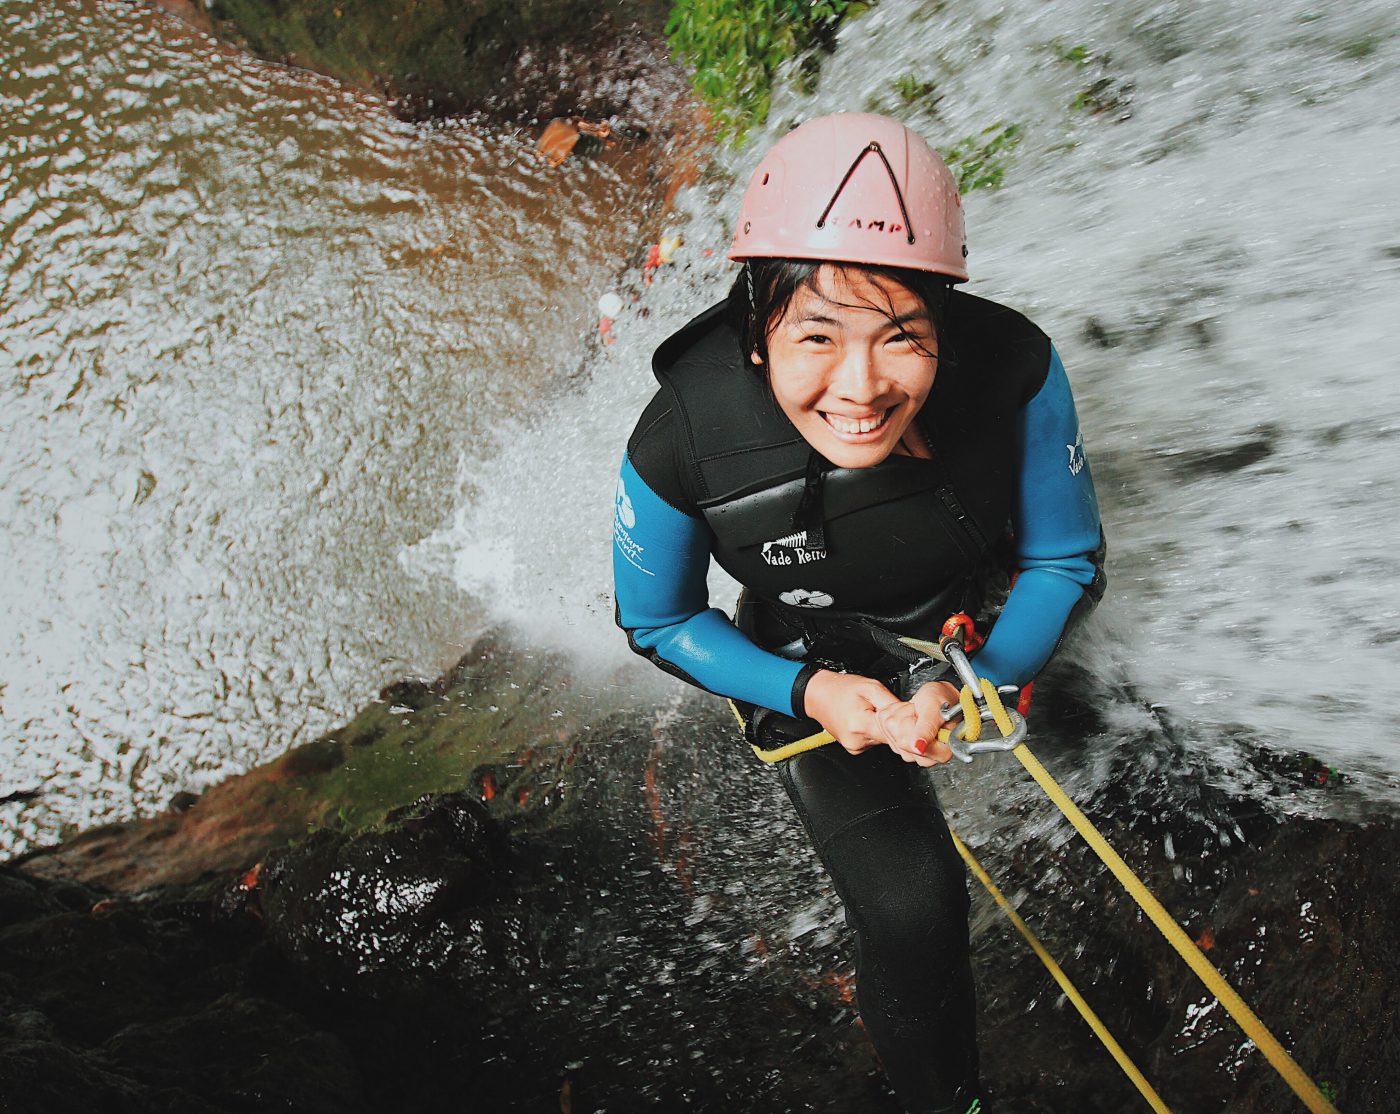 Adventure Canyoning - Right before rappelling down the 15m waterfall